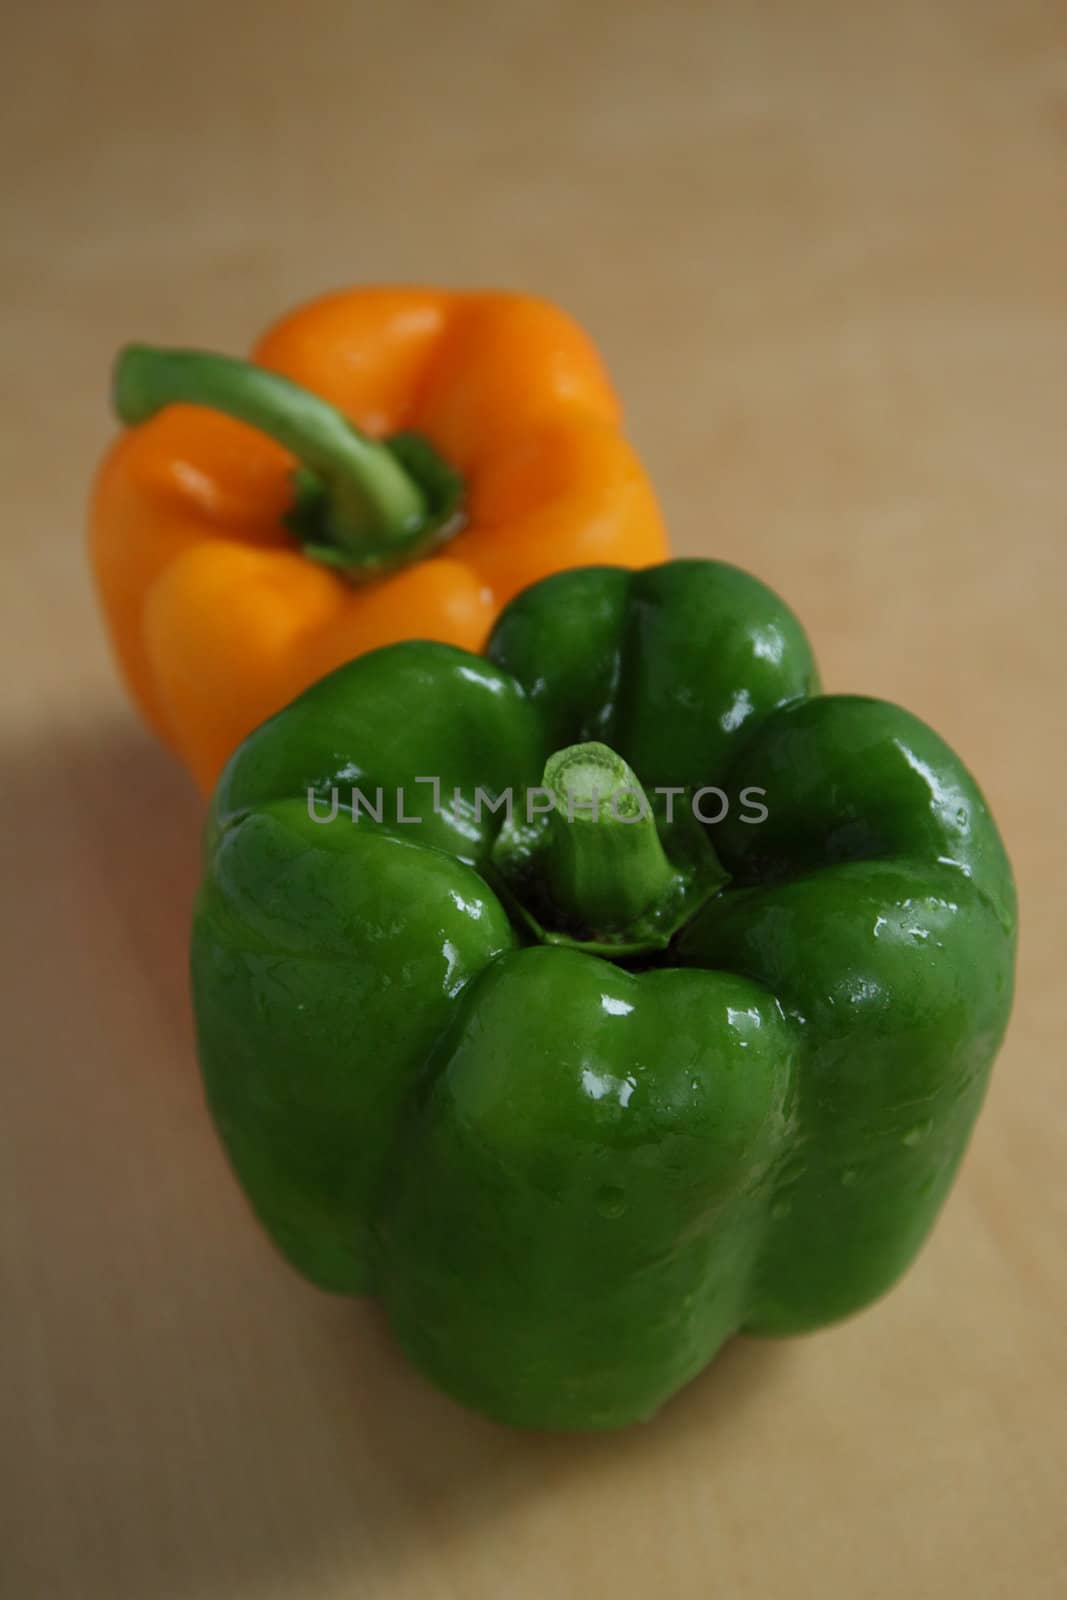 Two peppers, green and orange, on the kitchen table